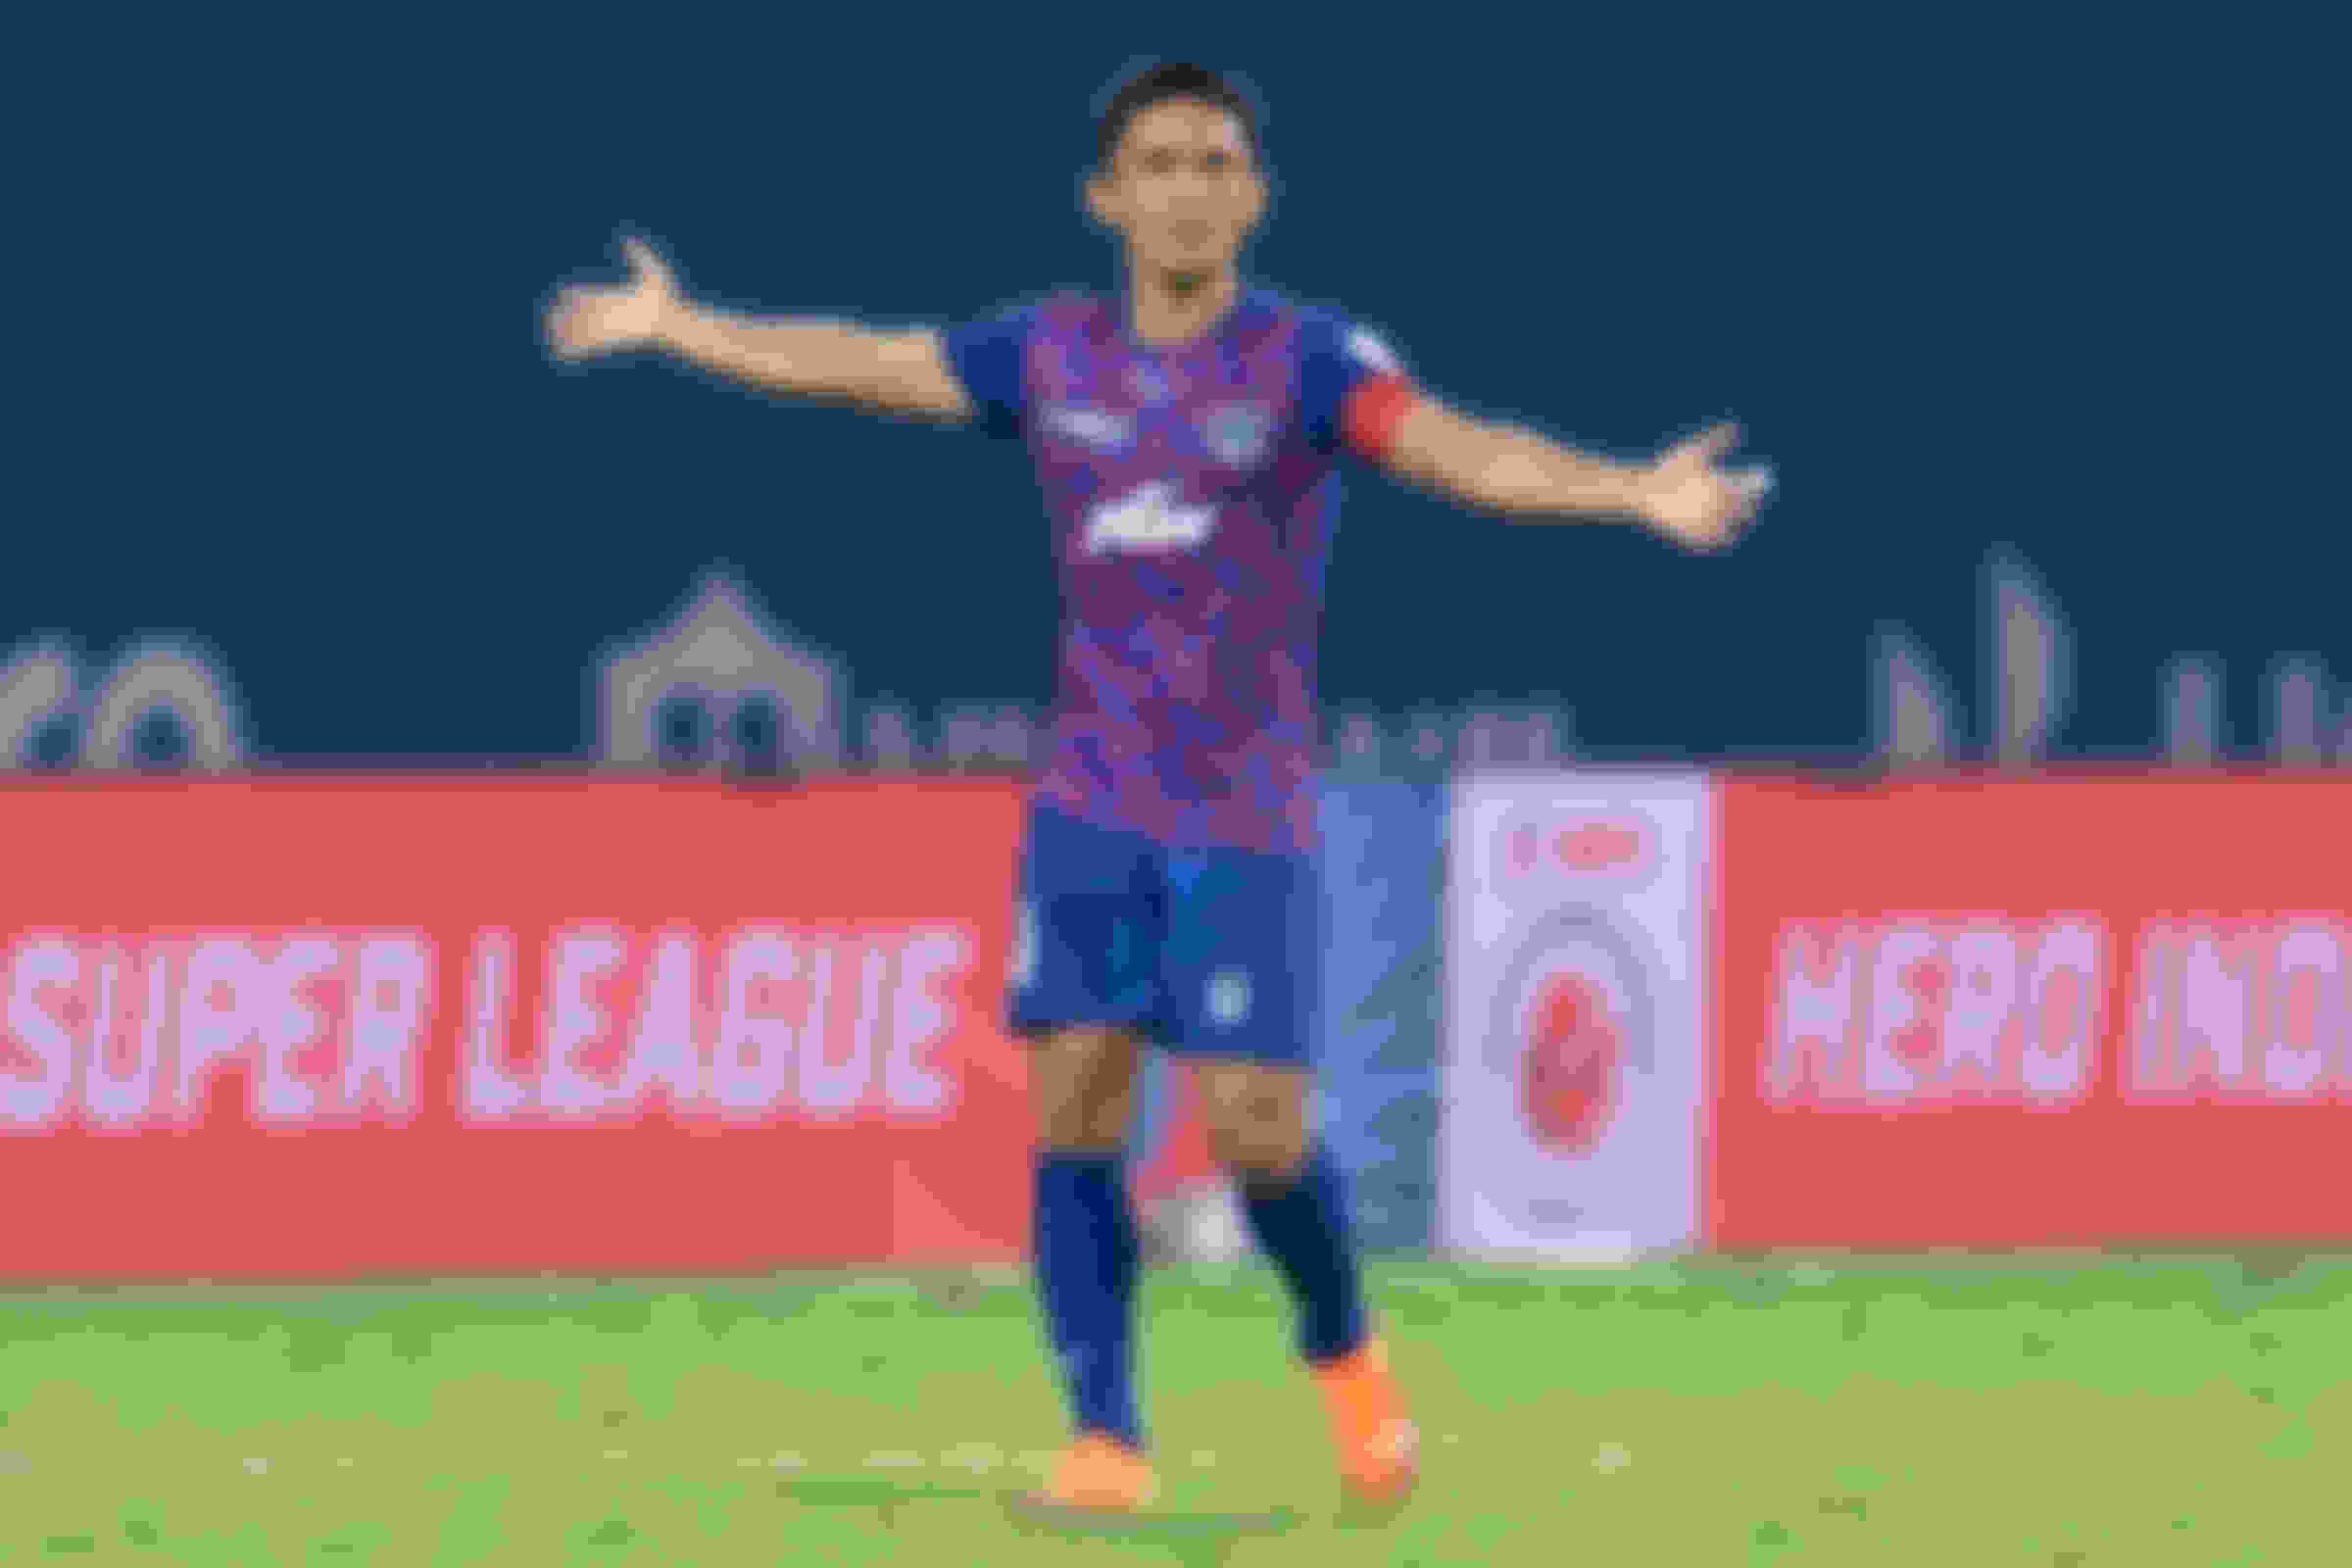 BFC's Sunil Chhetri after scoring a goal. A milestone moment for the skipper who becomes the first player to reach the 50-goal mark in the ISL.